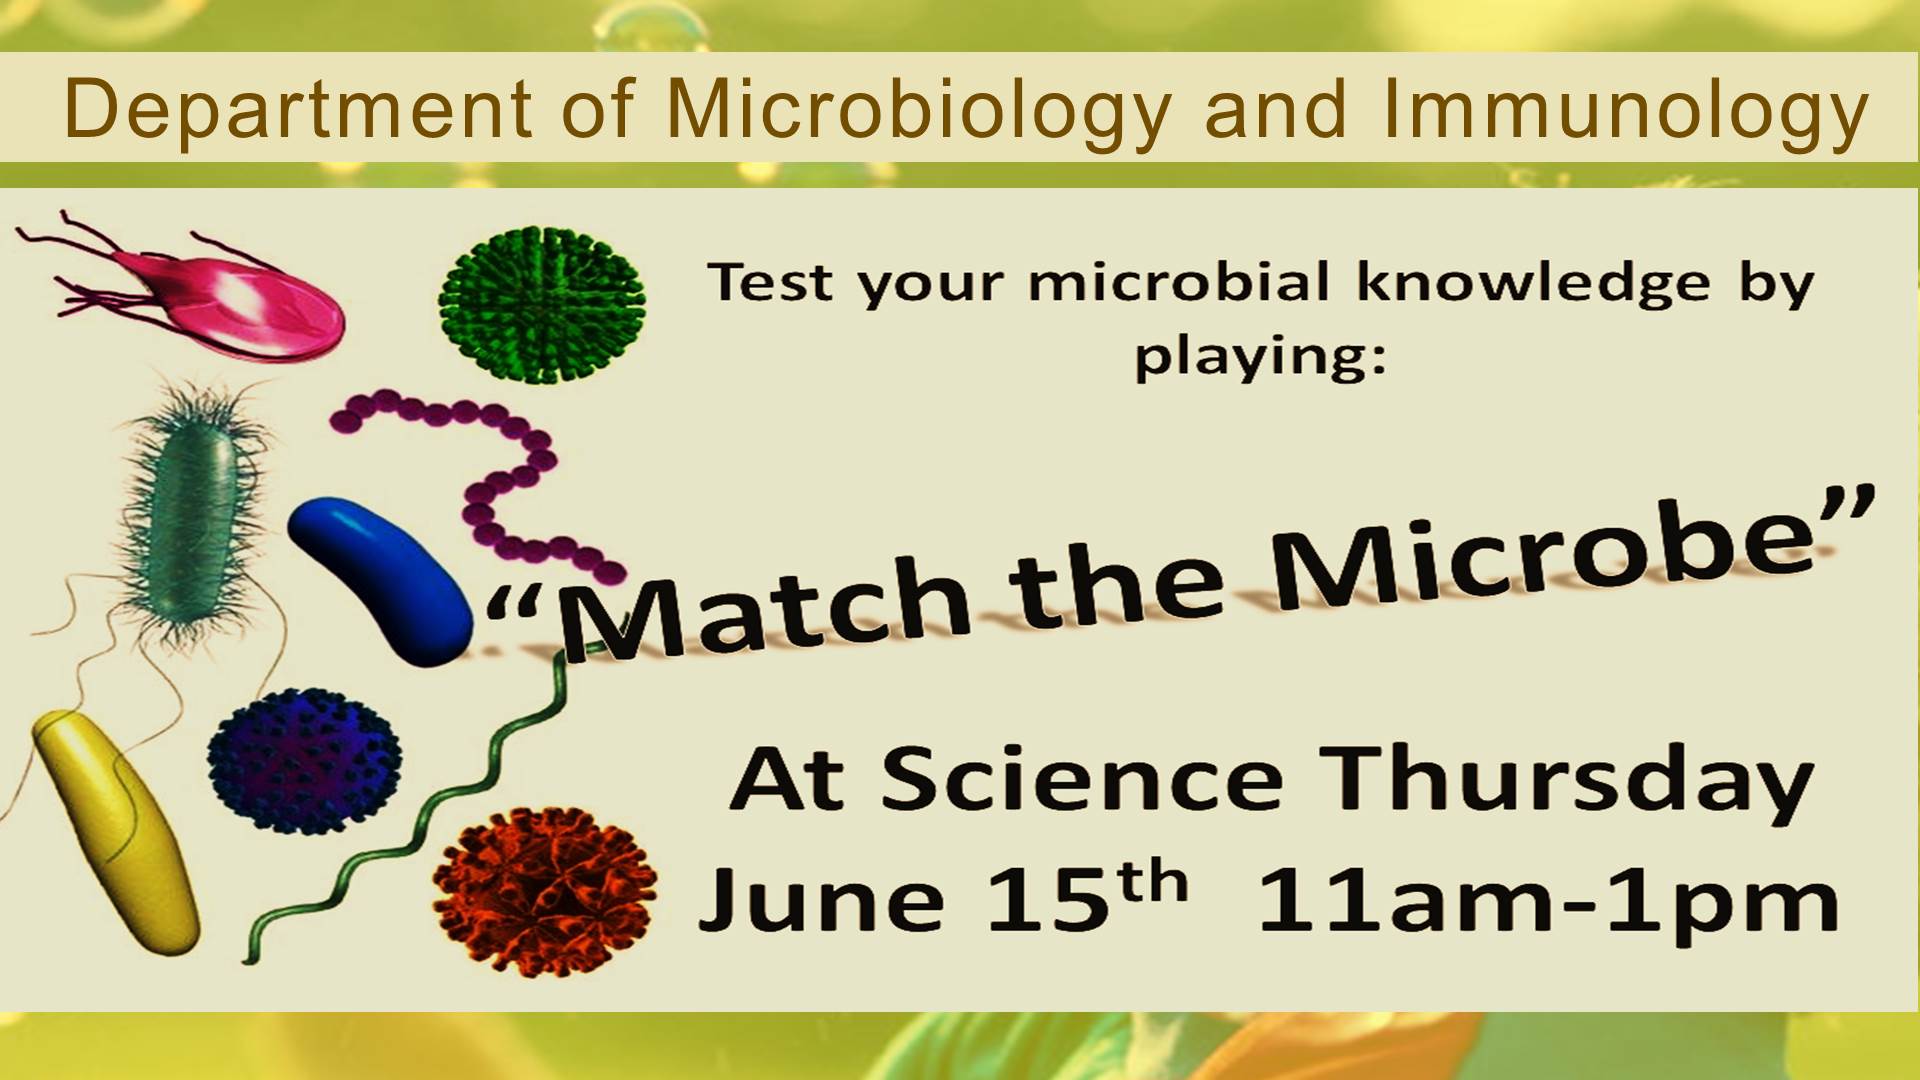 Match the Microbe at Science Thursday